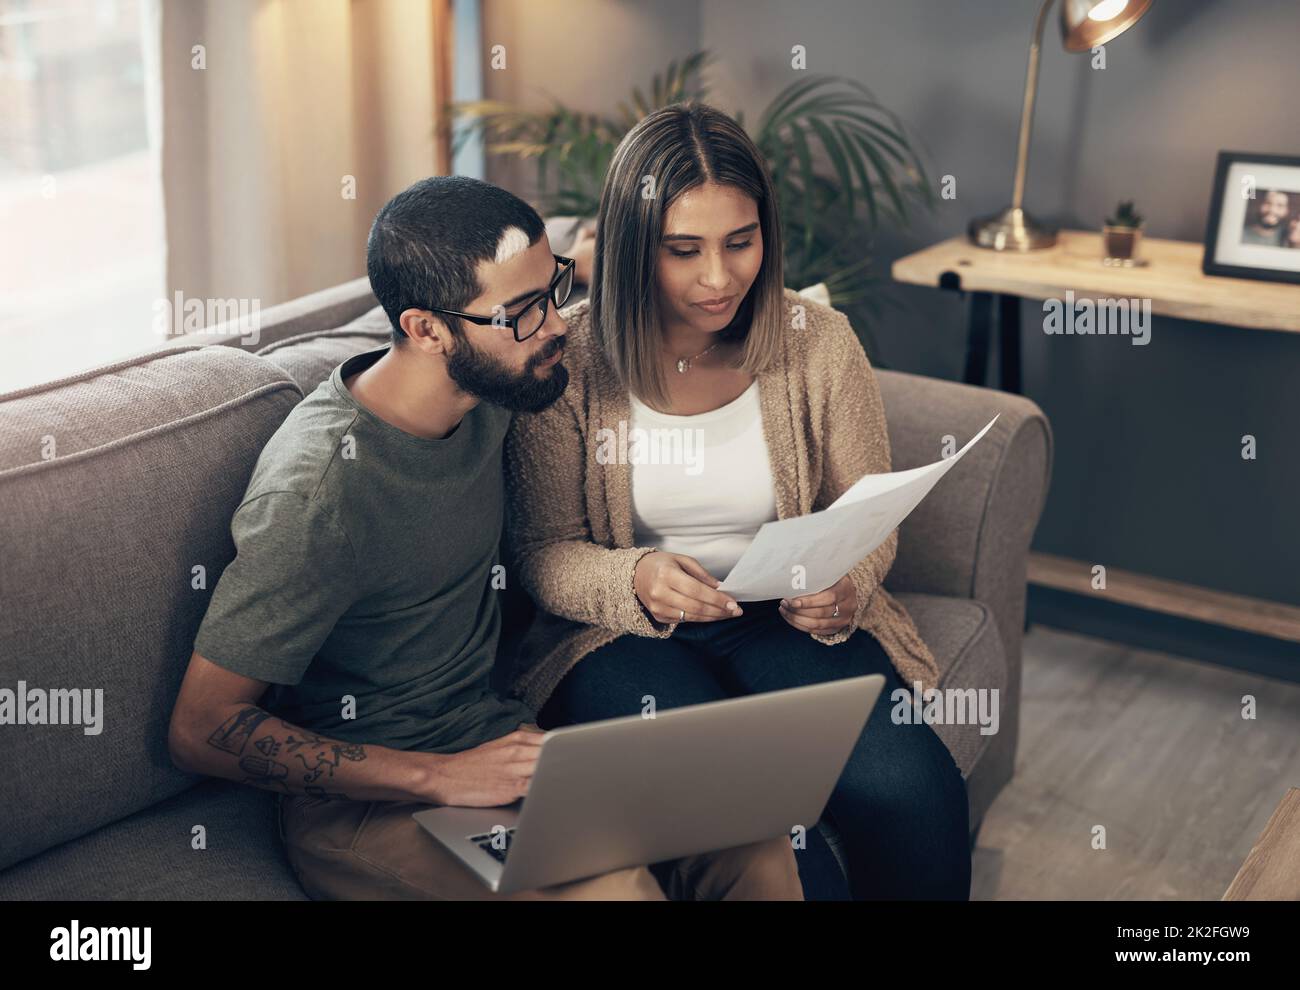 All hands on deck for creating a stable home. Shot of a young couple using a laptop while going through paperwork at home. Stock Photo